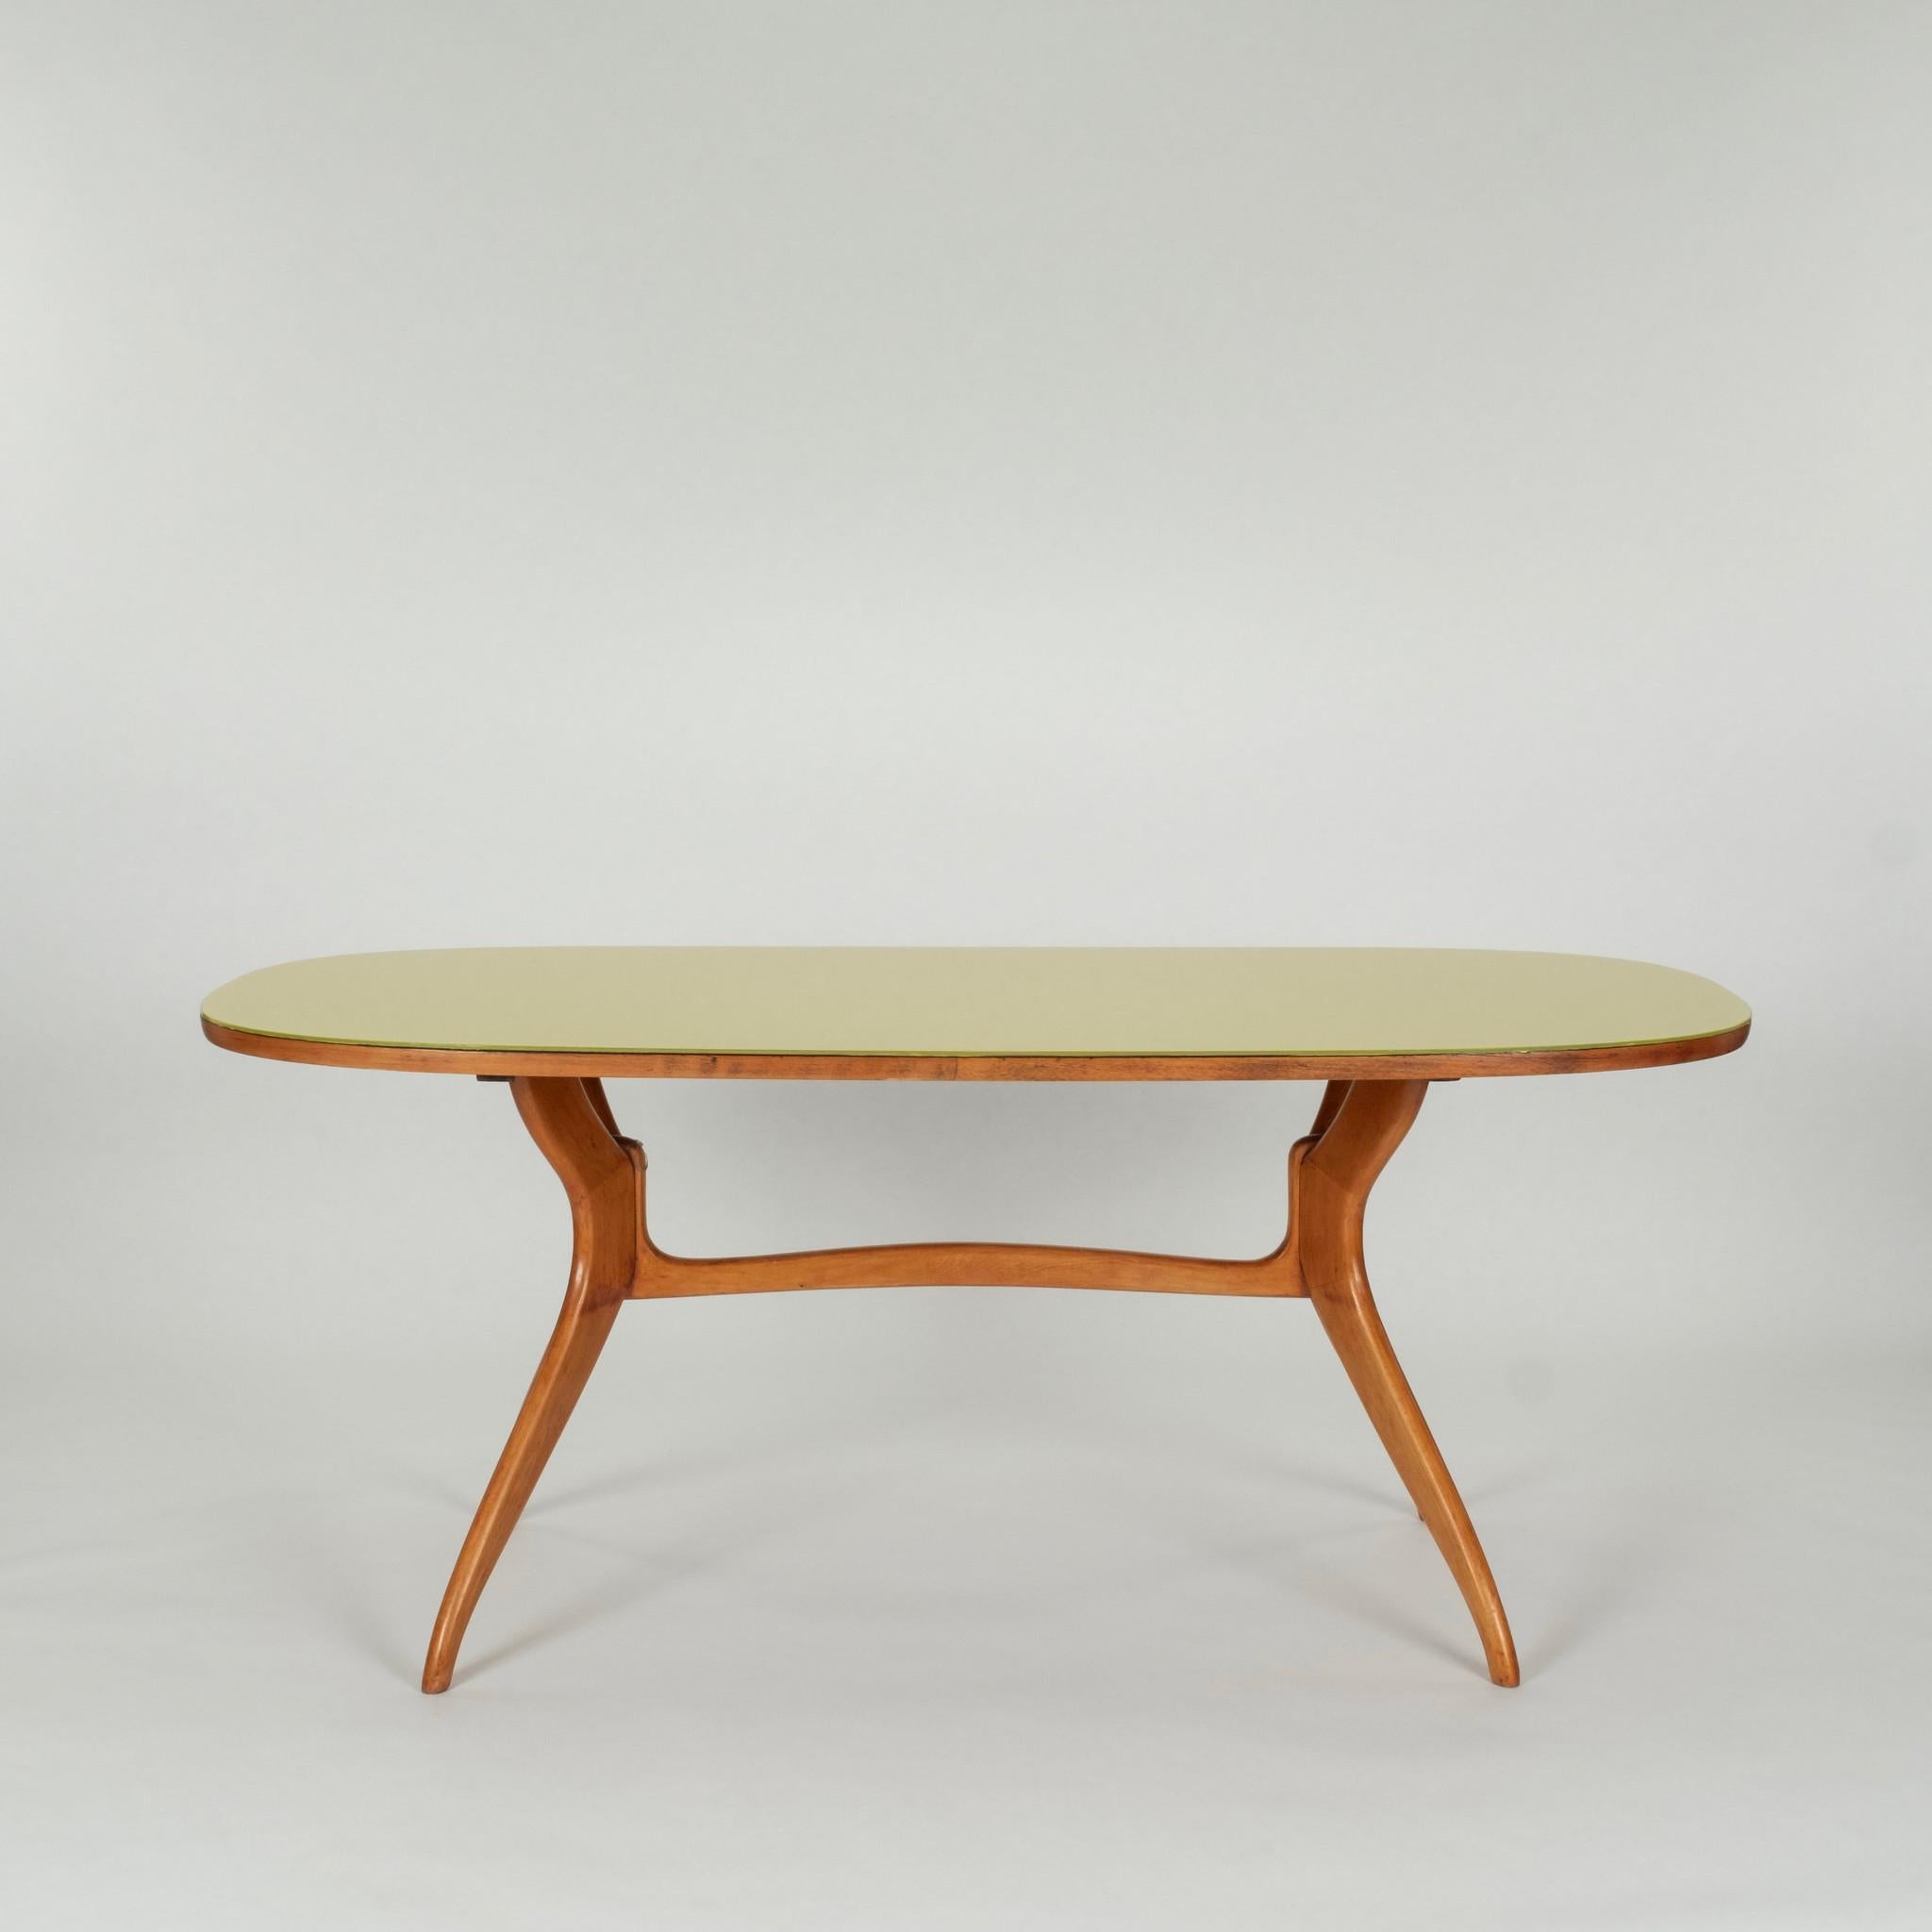 Italian Mid-crntury-modern walnut table with reverse painted chartreuse glass top.
